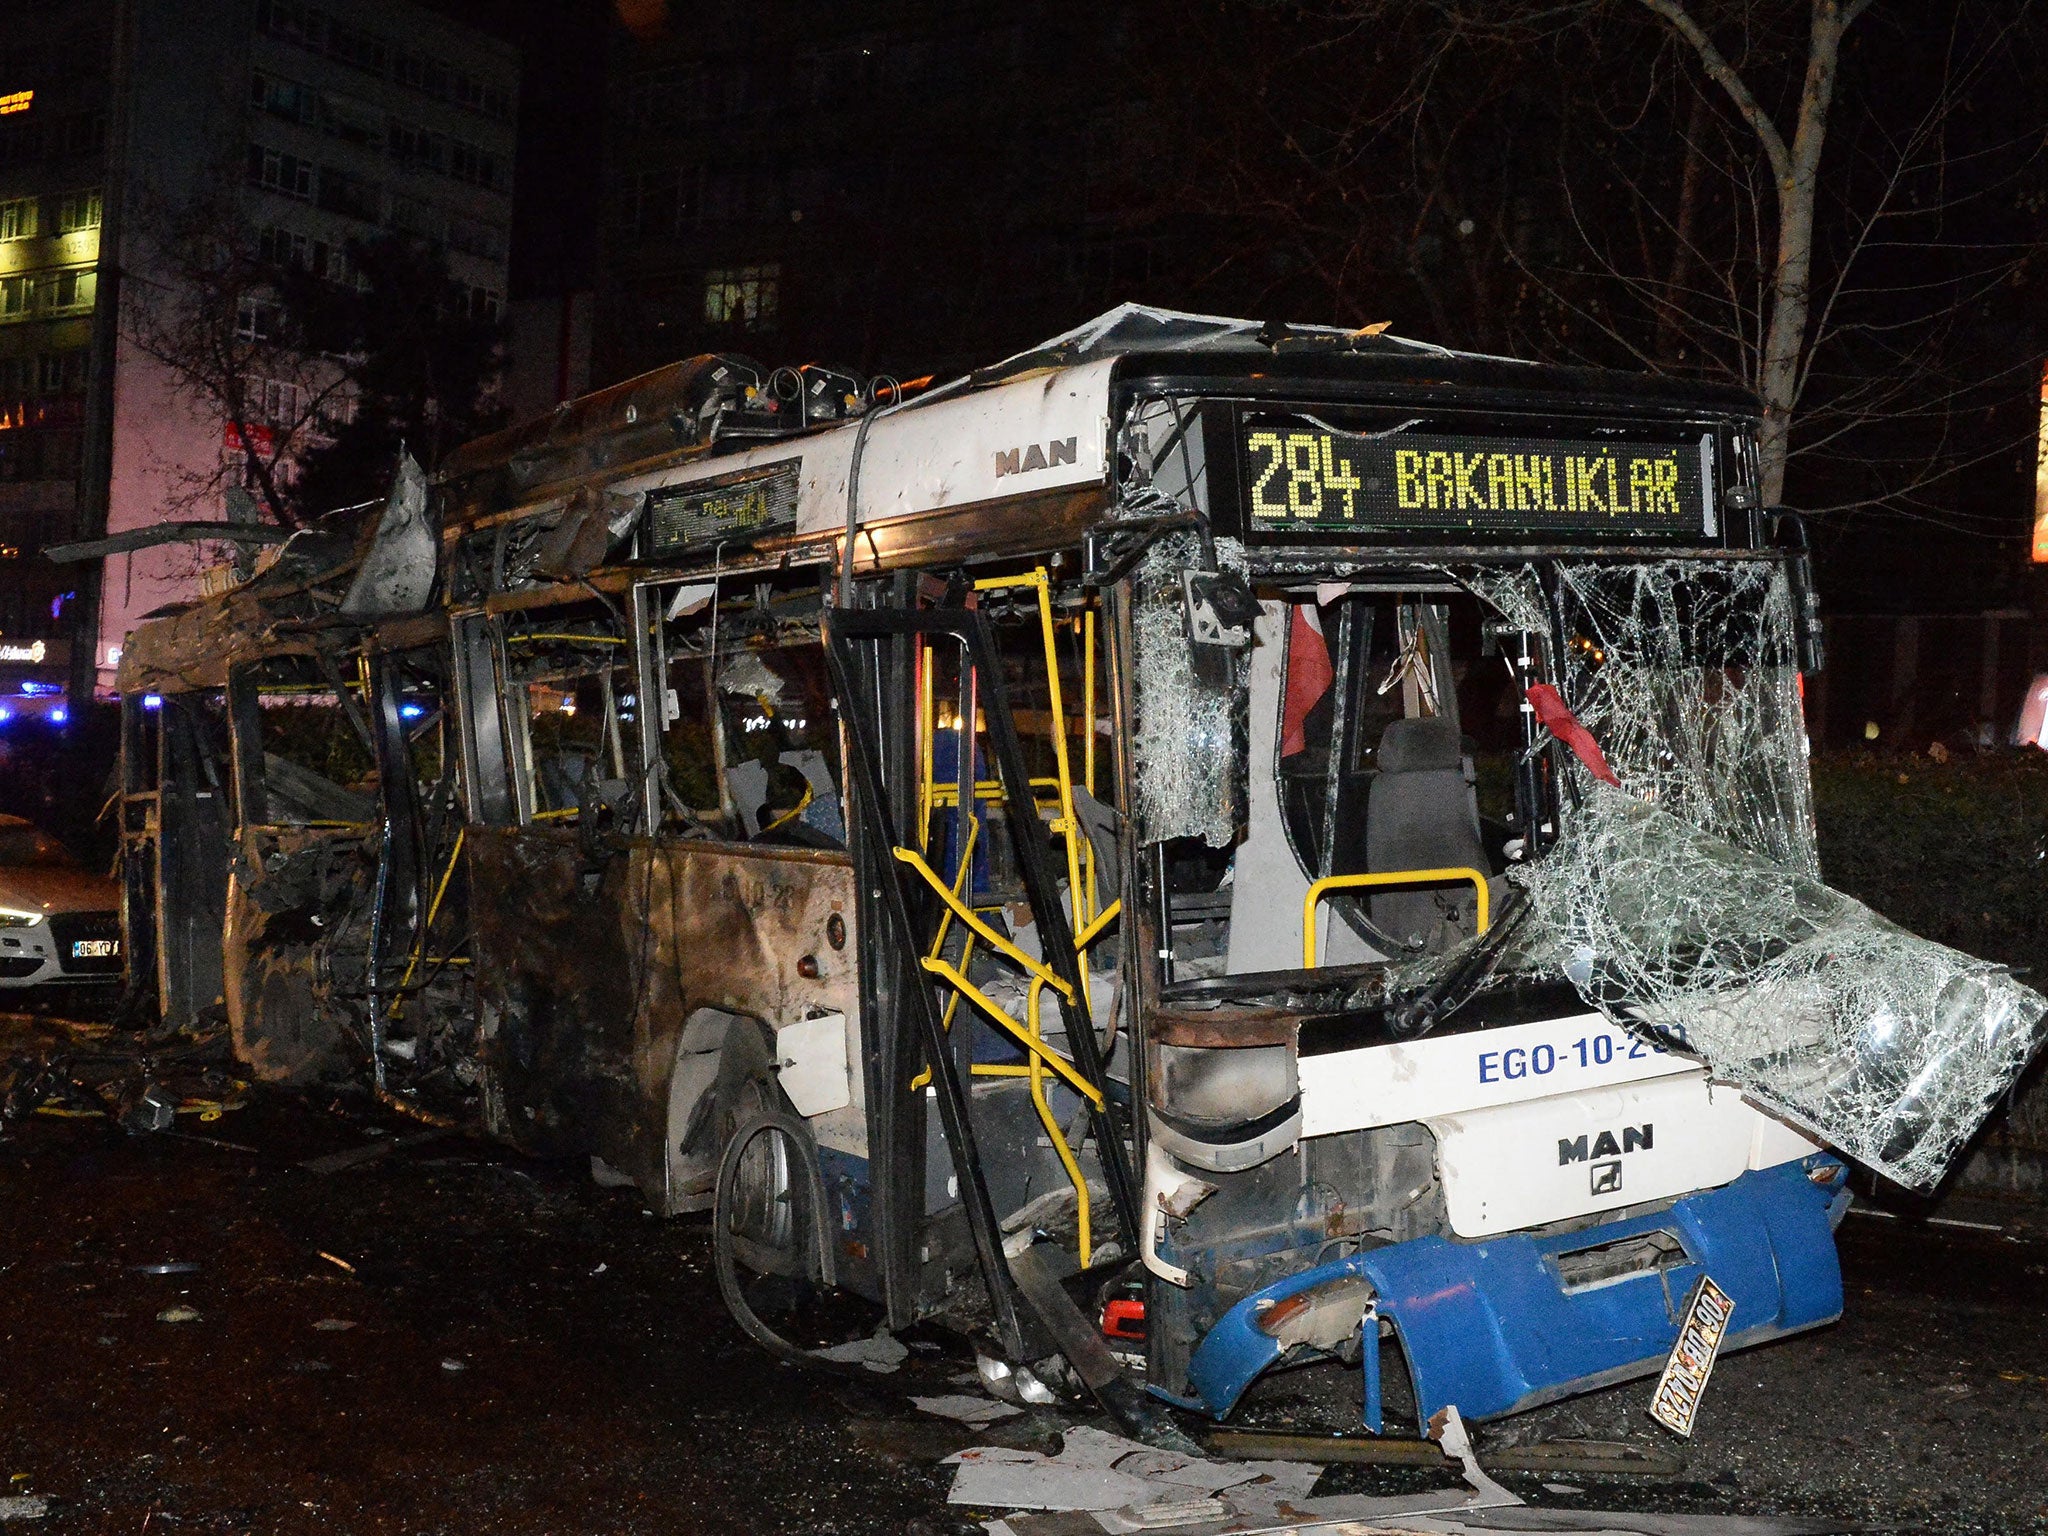 A destroyed bus is seen in the street after an explosion in Ankara. The exploison happened near a crowded bus station and many people were reported to have suffered injuries according to local media